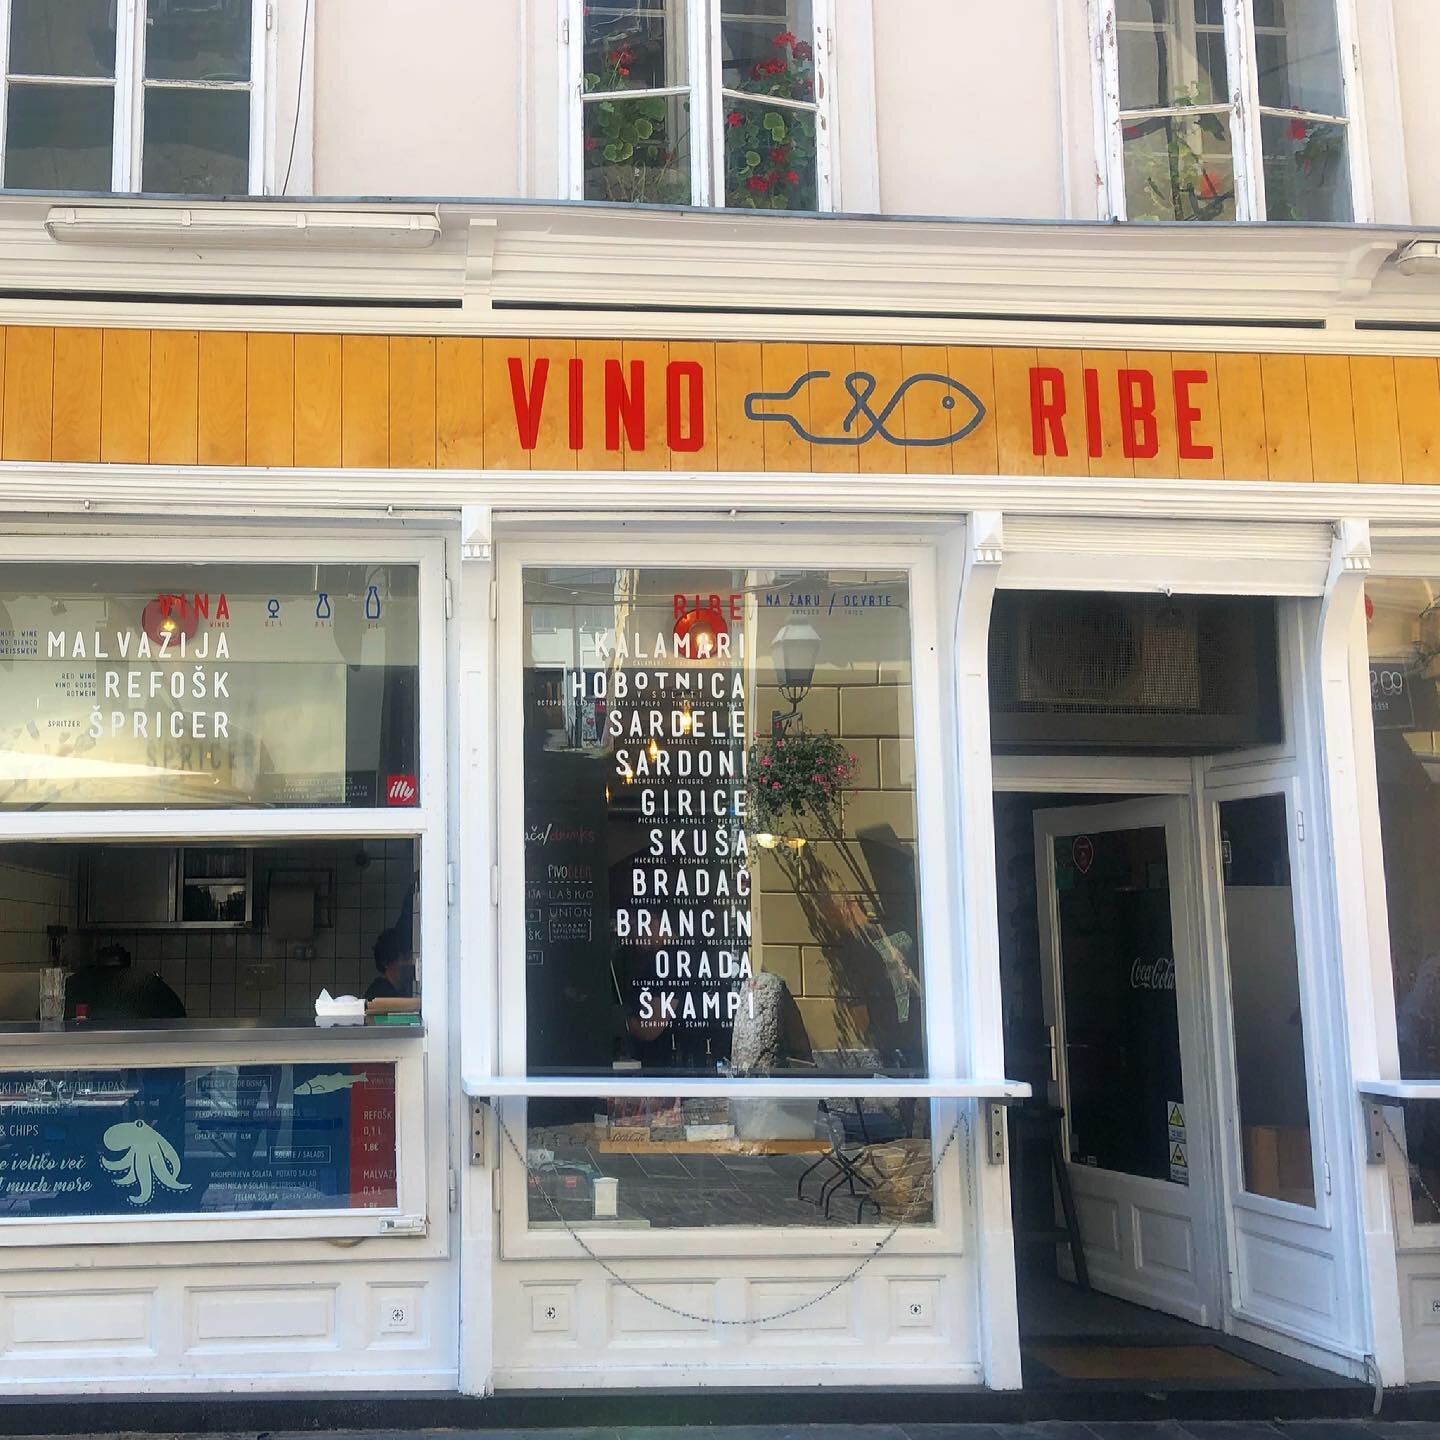 Sometimes I like to play the game &ldquo;What would I do today if I was in...&rdquo;. Want to play along? If I was in Ljubljana (Slovenia) today, I would have a delicious seafood filled lunch @vinoinribe, visit Central Market, hike up to the Castle, 